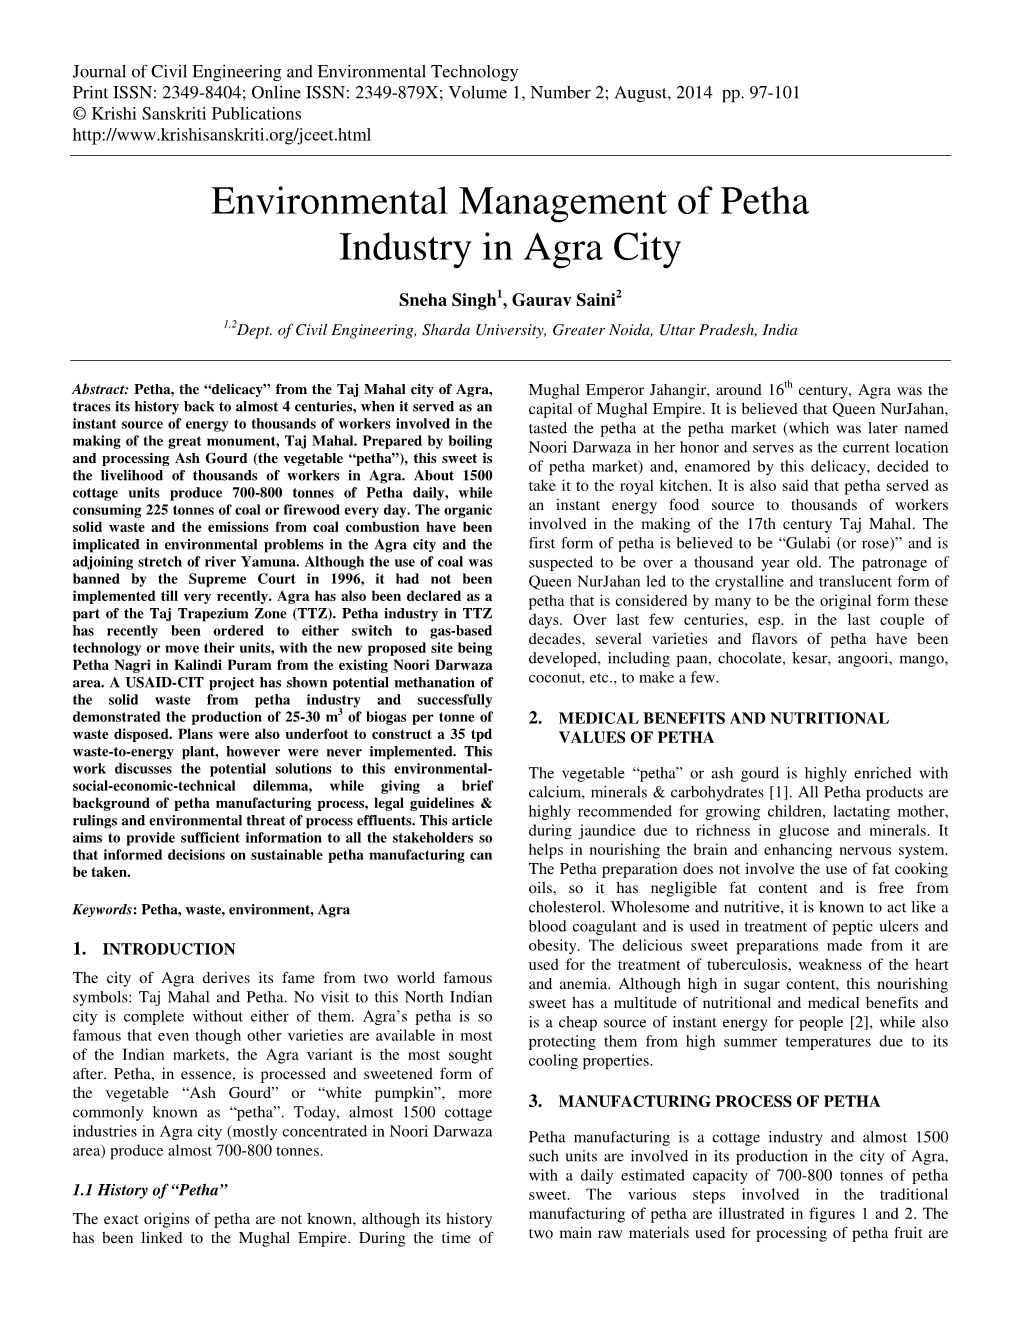 Environmental Management of Petha Industry in Agra City